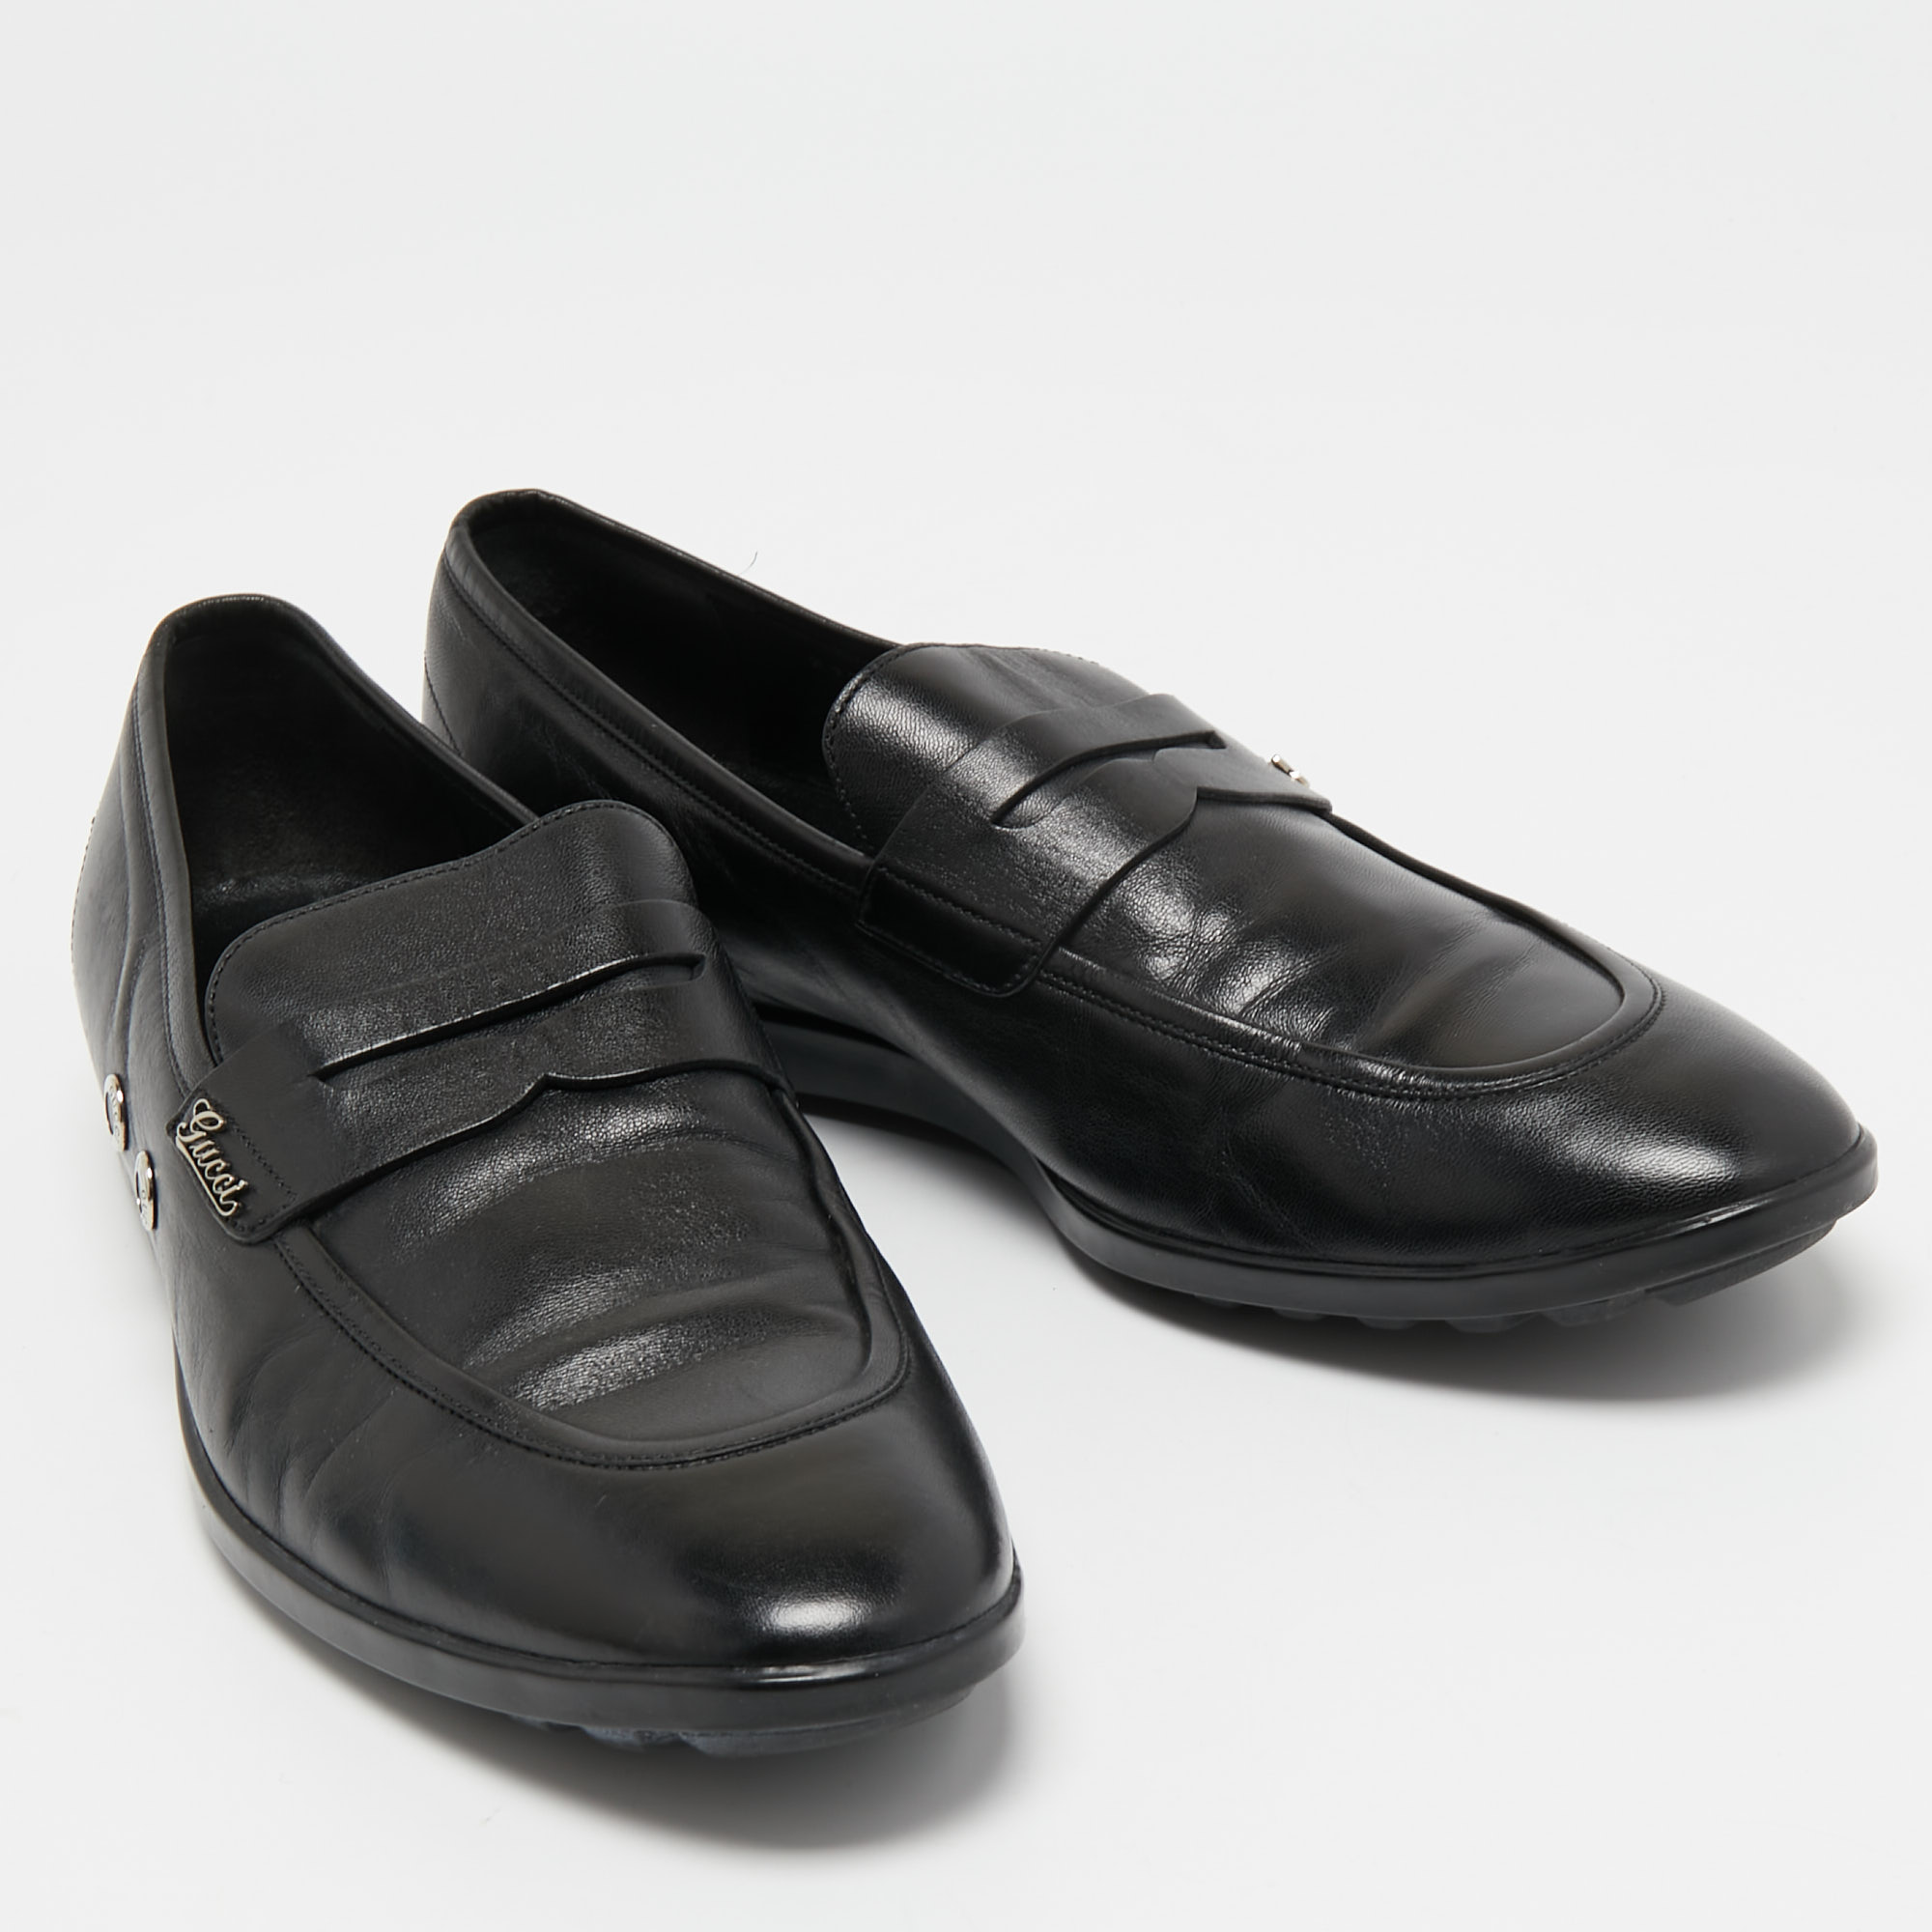 Gucci Black Leather Slip On Loafers Size 40.5